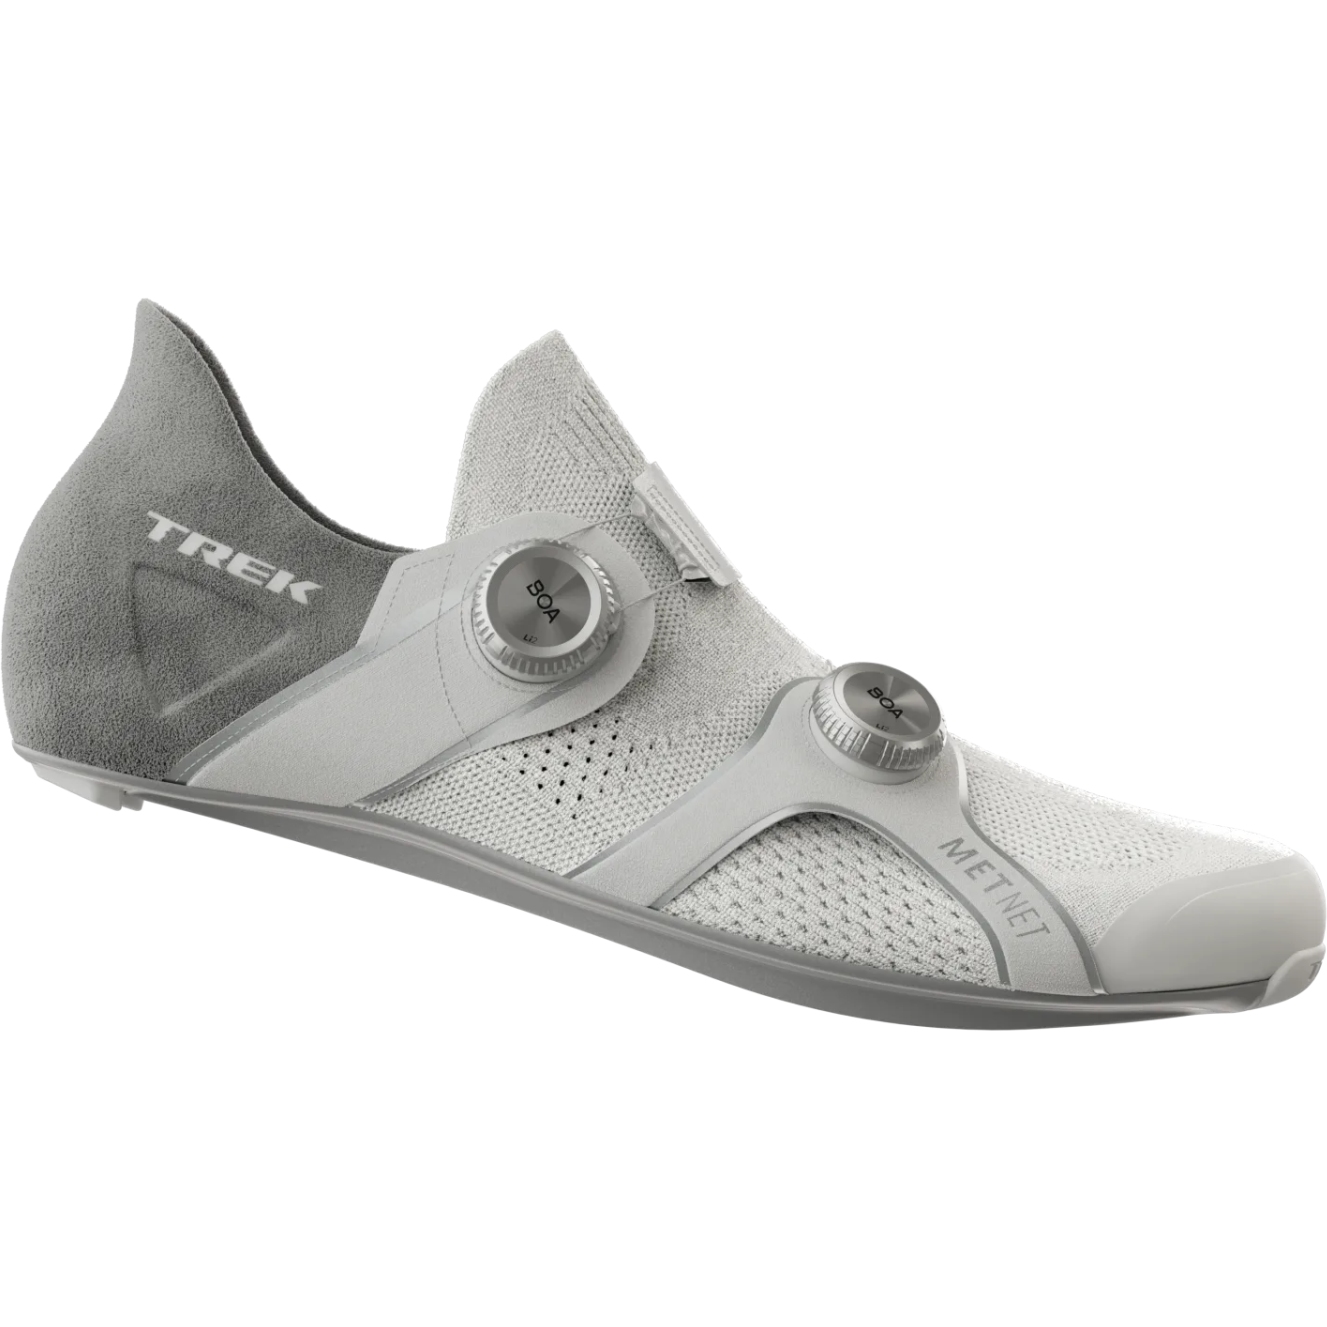 Picture of Trek RSL Knit Road Shoes - White/Silver